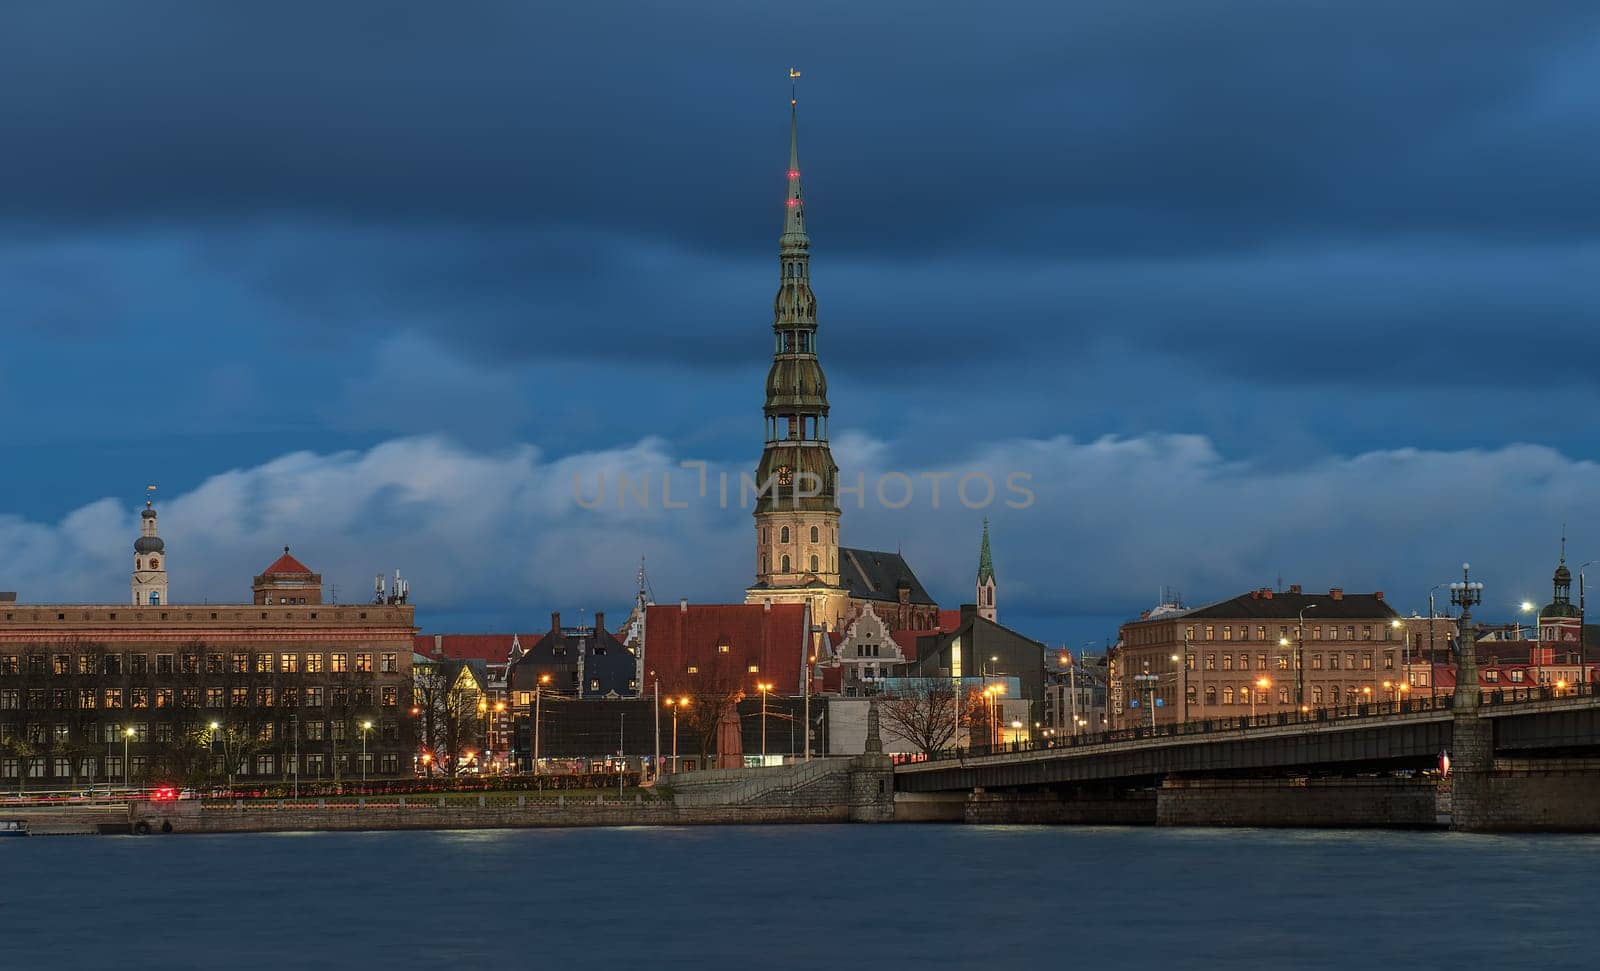 view of Old Riga across the Daugava River, view of St. Peter's Church and Town Hall Square